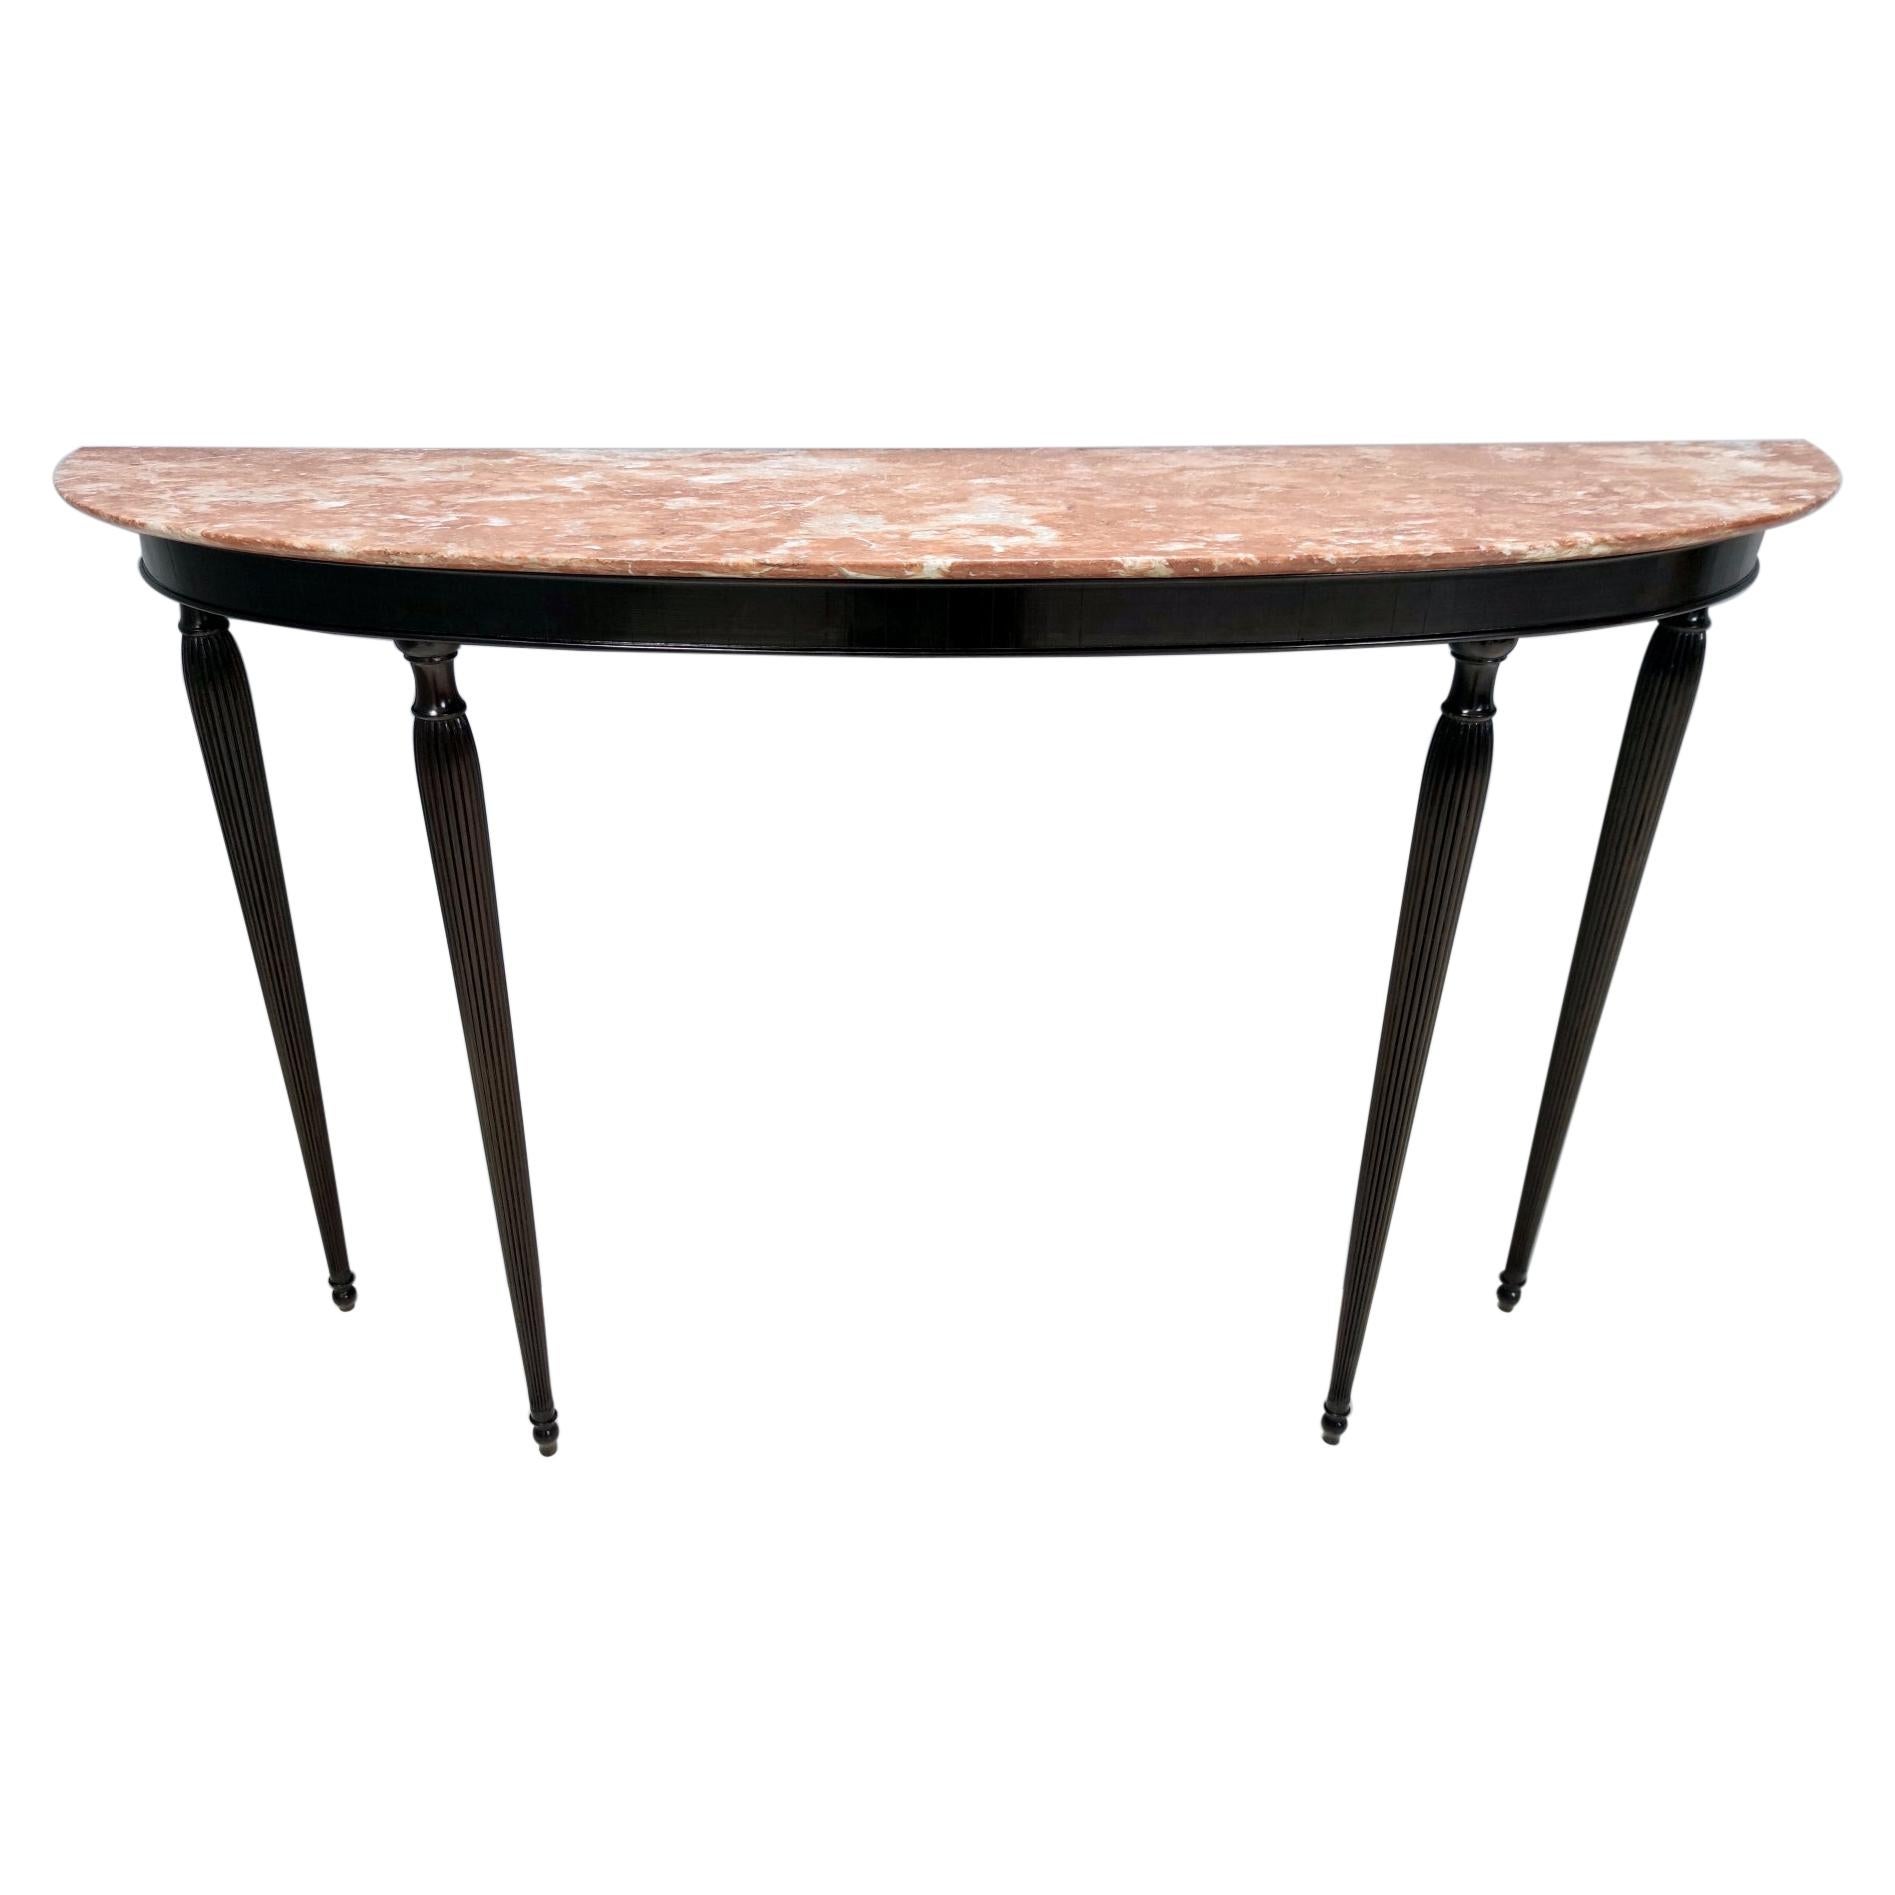 Vintage Ebonized Walnut Console Table with Red Travertine Marble Top, Italy